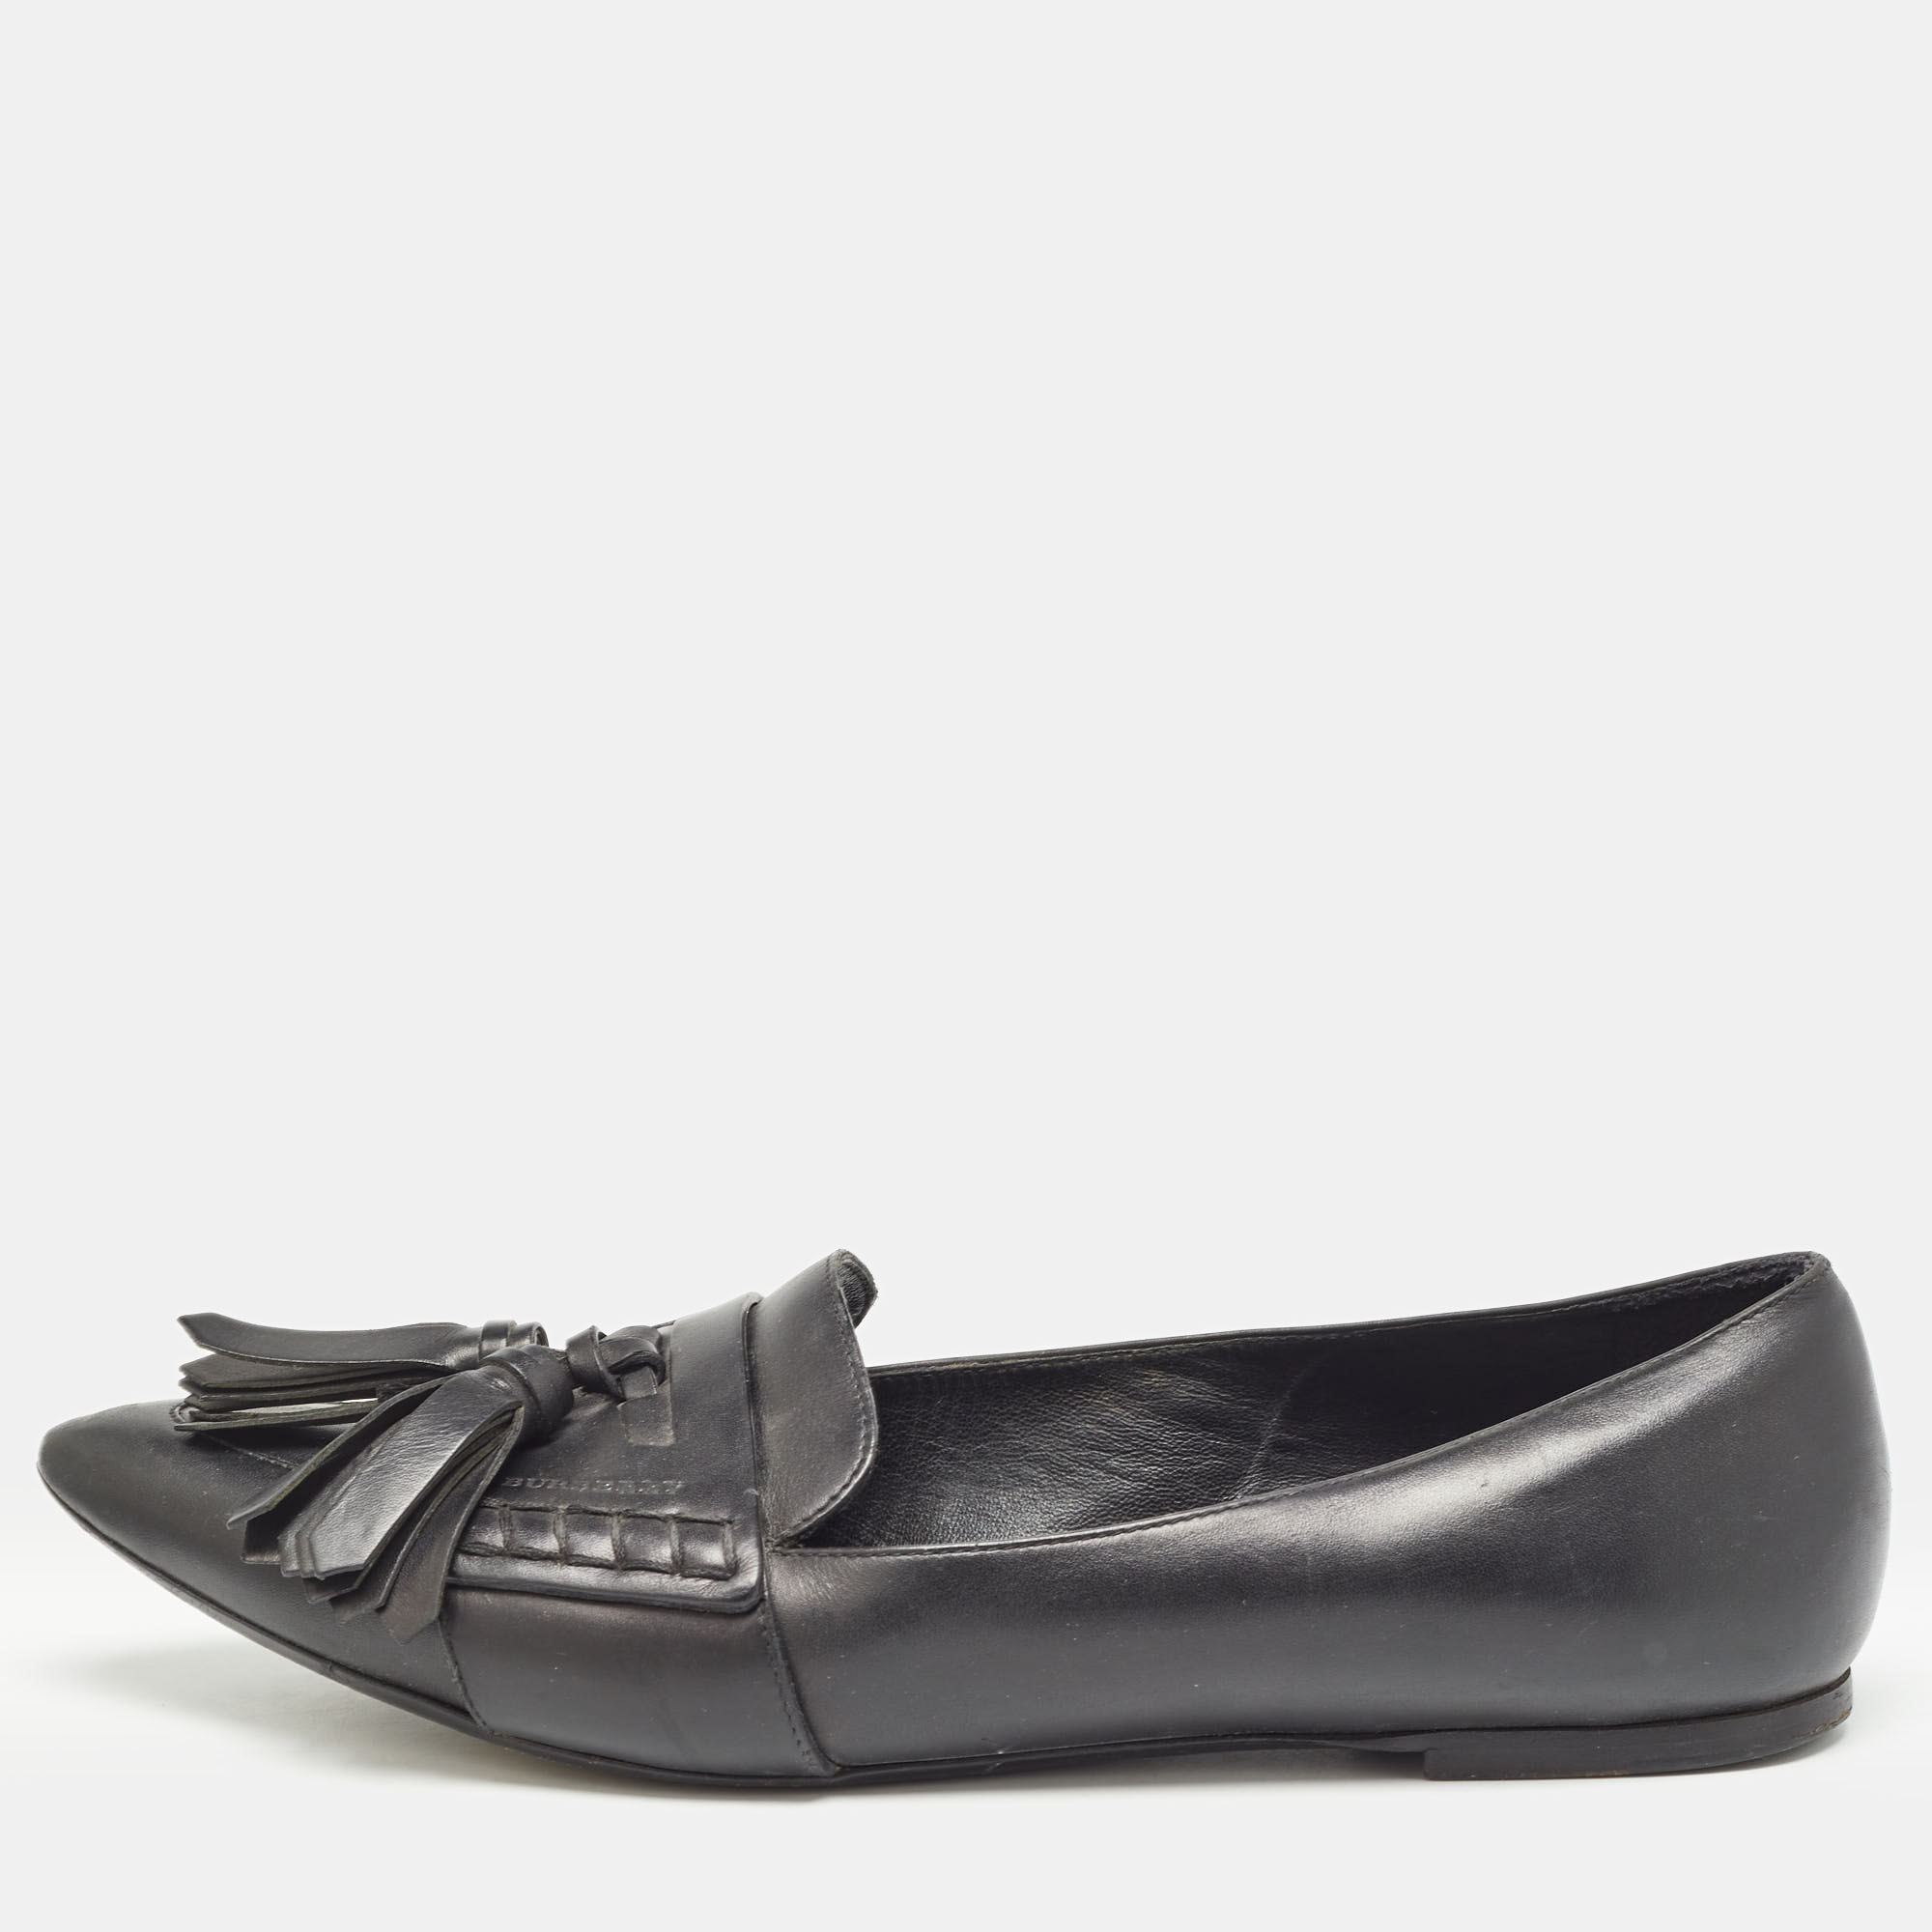 

Burberry Black Leather Tassel Pointed Toe Ballet Flats Size